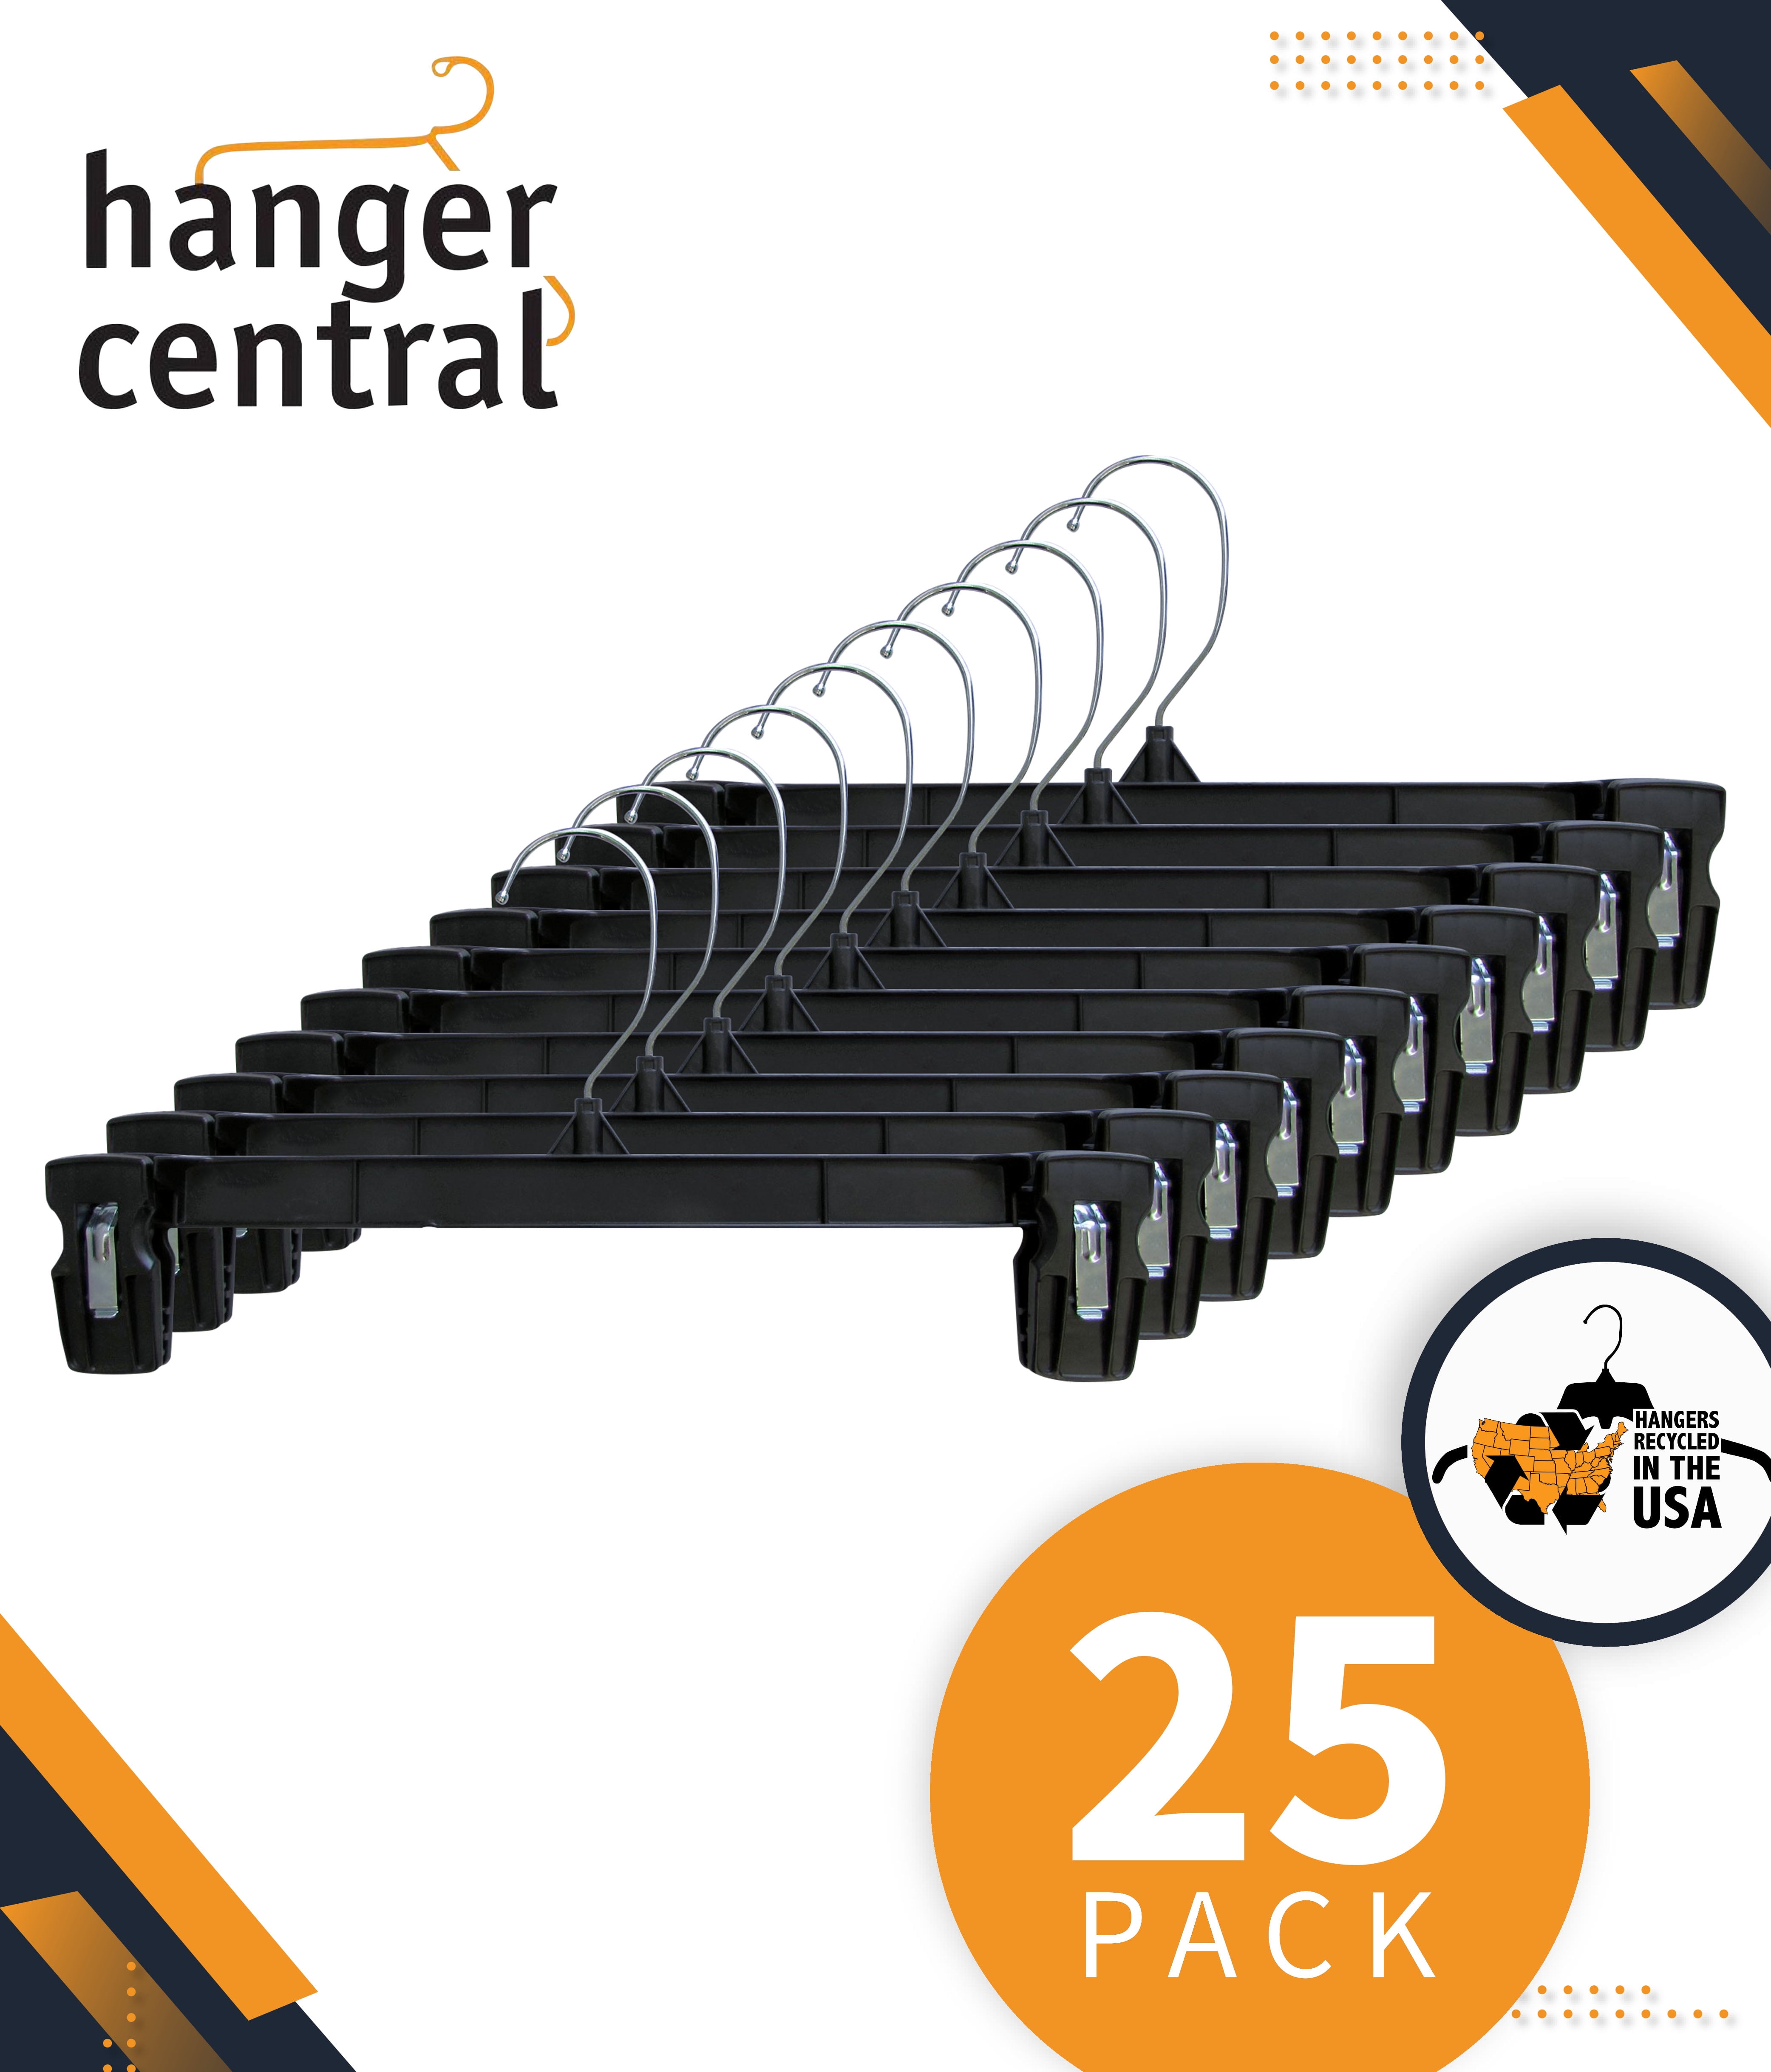 Perfecasa Extra Non Slip Plastic Clothes Hangers 30 Pack, with Sure Gr